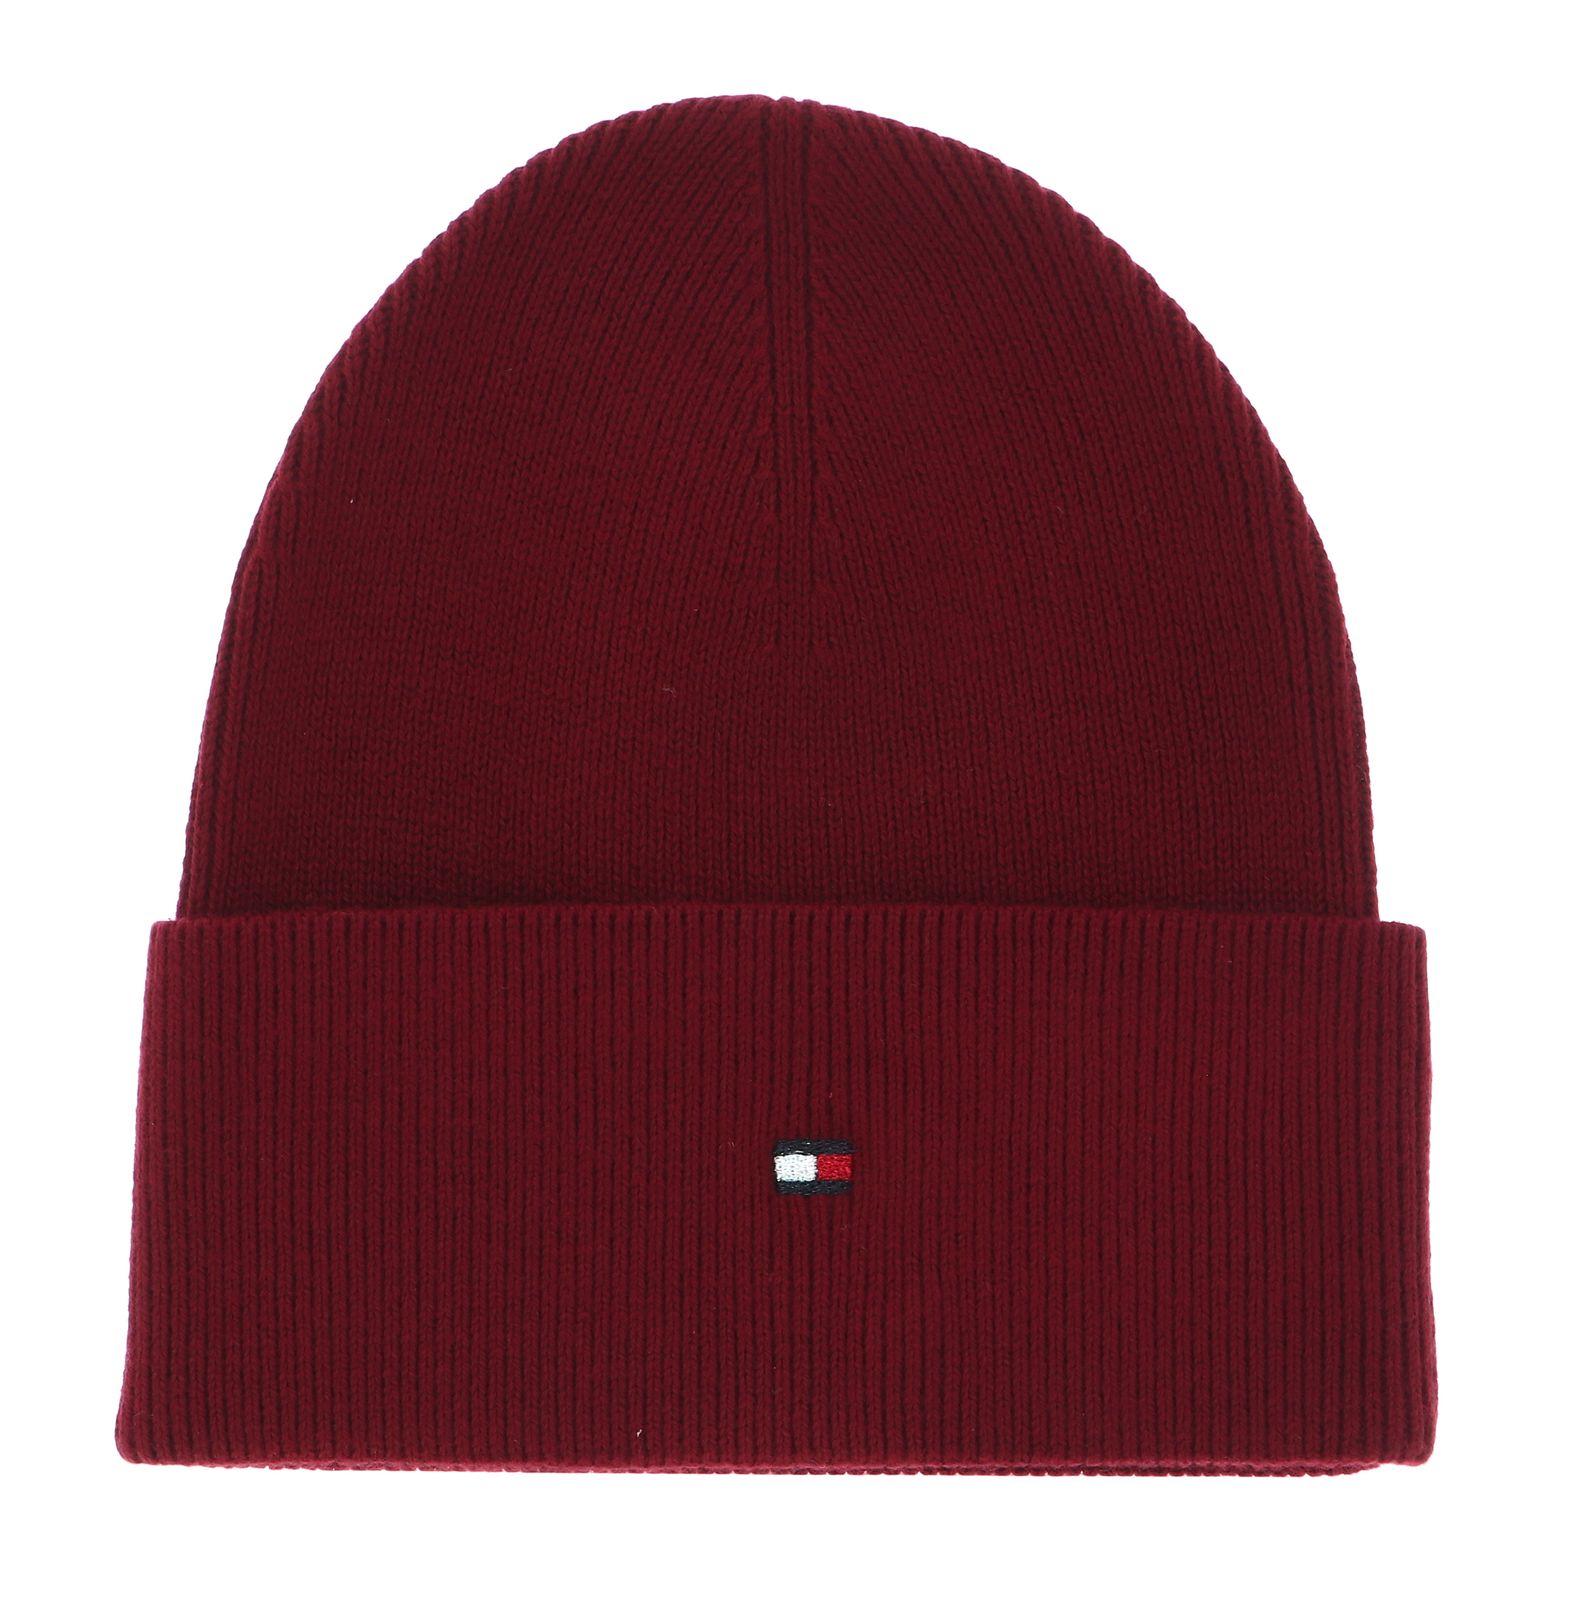 TOMMY HILFIGER | Buy cap Beanie | Rouge Essential Flag online purses bags, & accessories modeherz